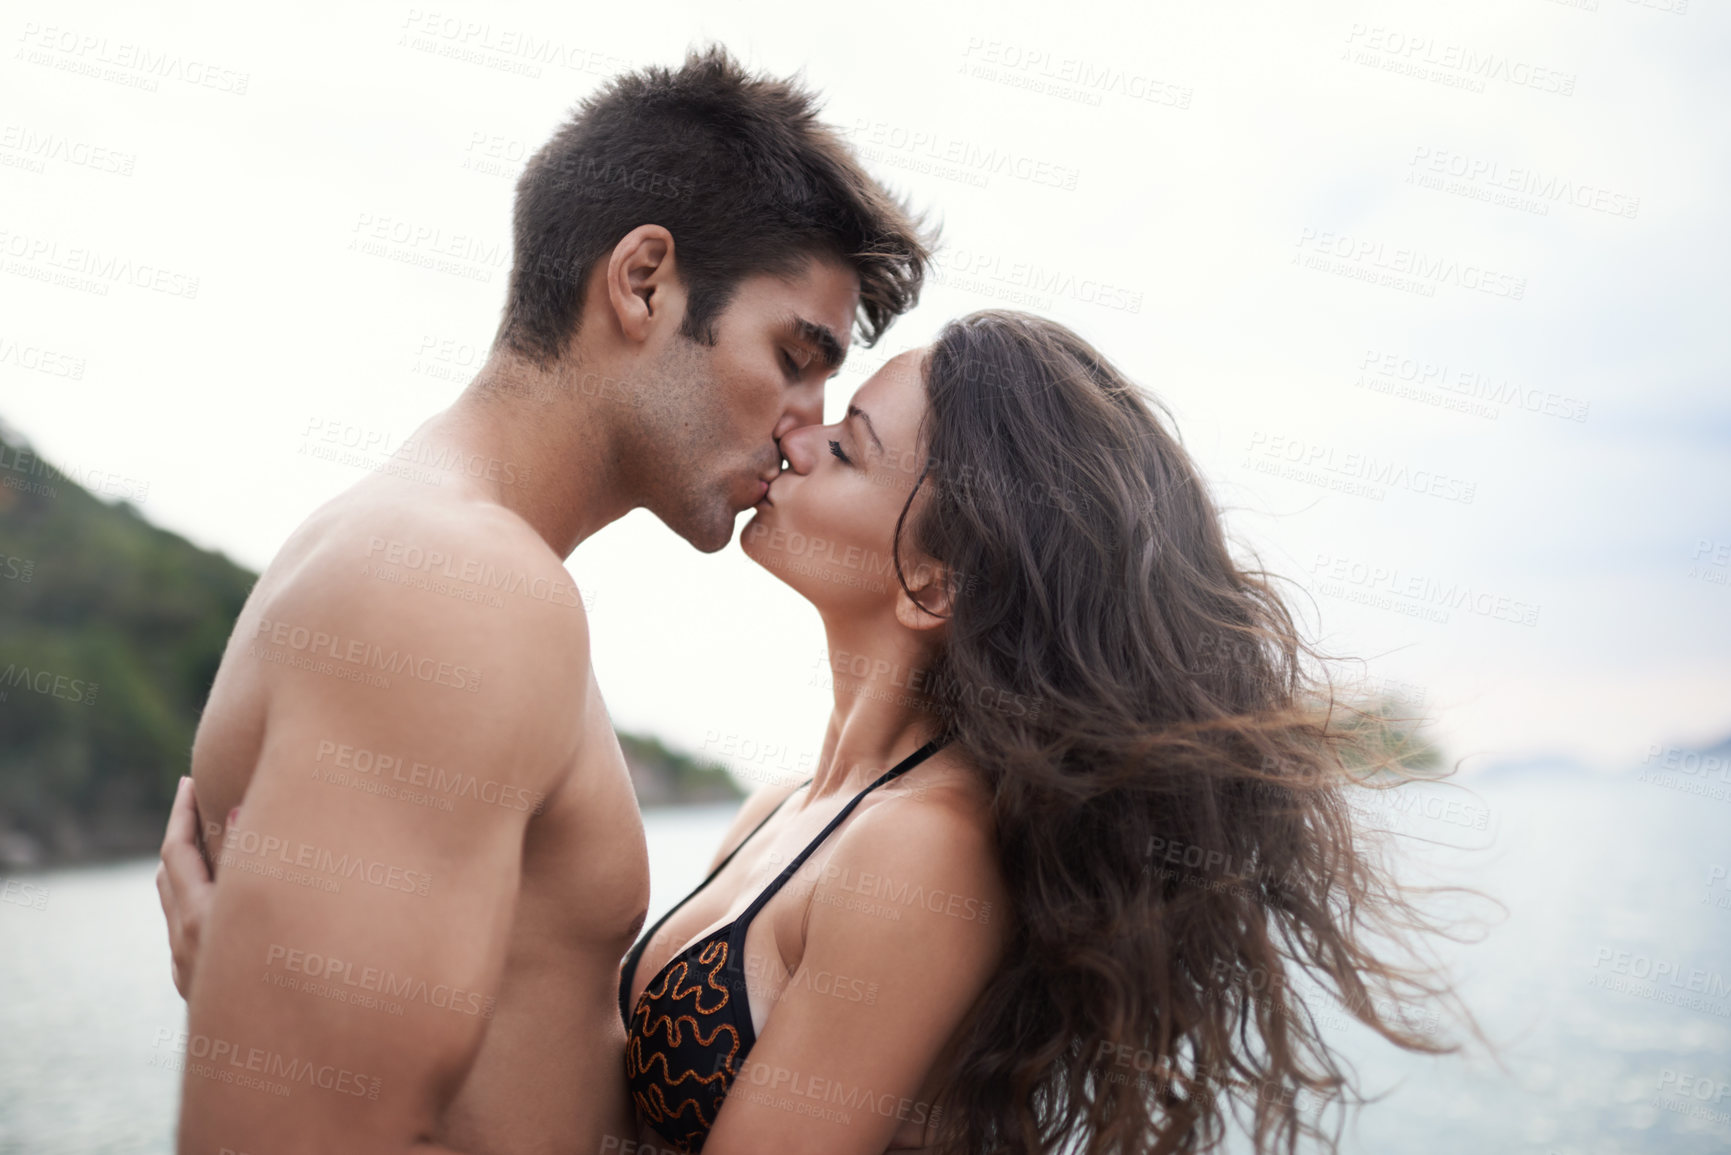 Shot of an intimate young couple enjoying a vacation by the sea - stock pho...